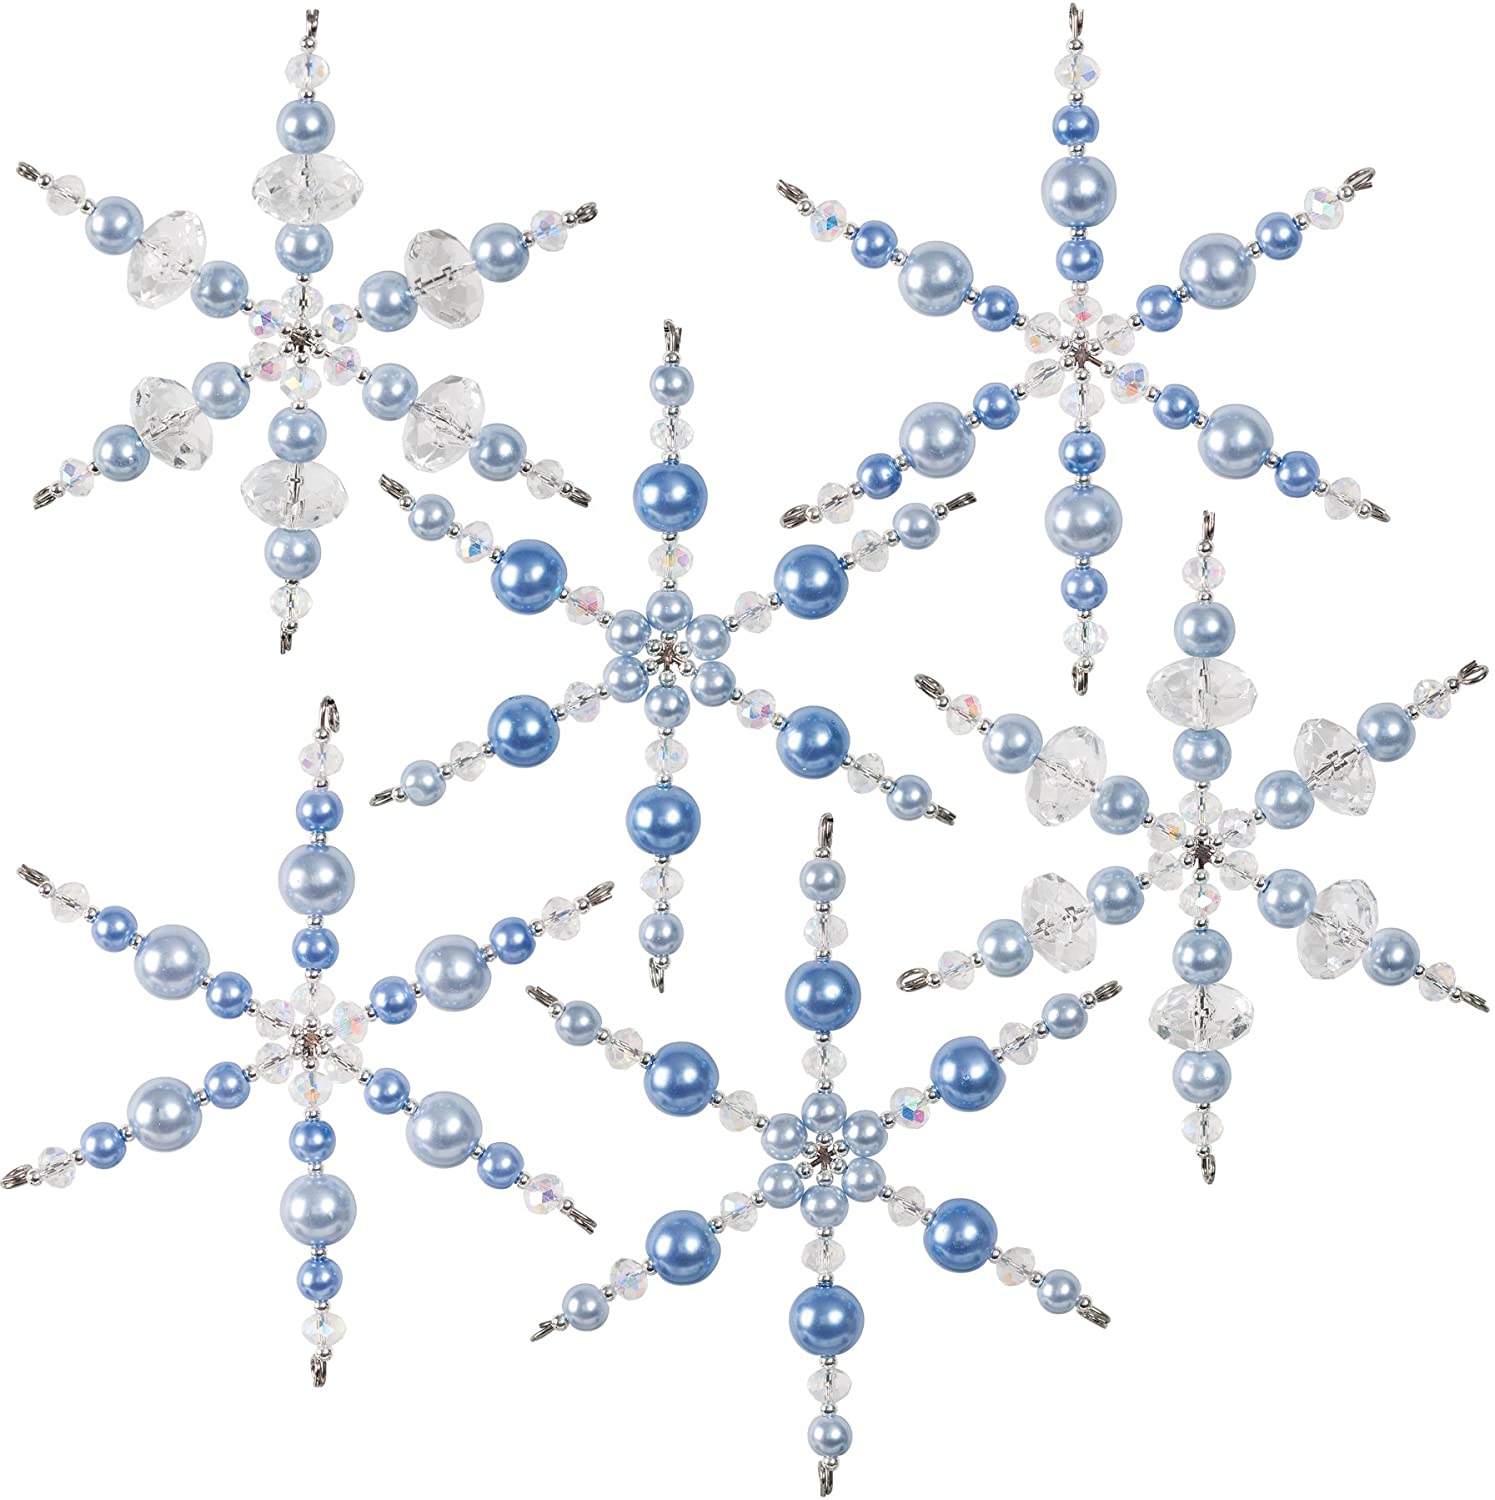 Six ornaments each with six prongs strung with clear, silver and blue beads 